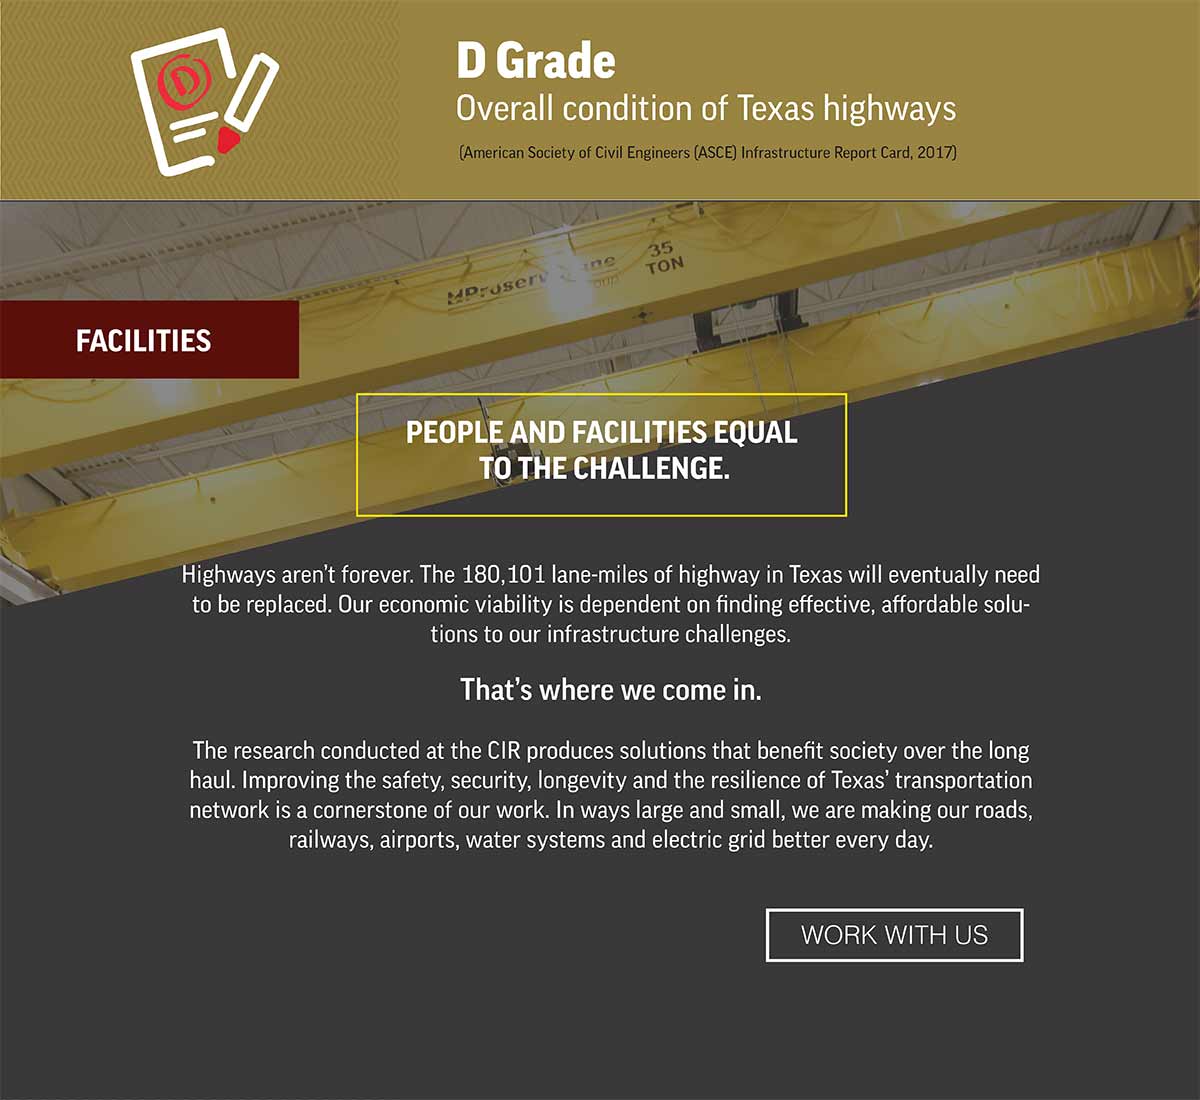 D Grade Overall condition of Texas Highways - Facilities - People and facilities equal to the challenge - work with us